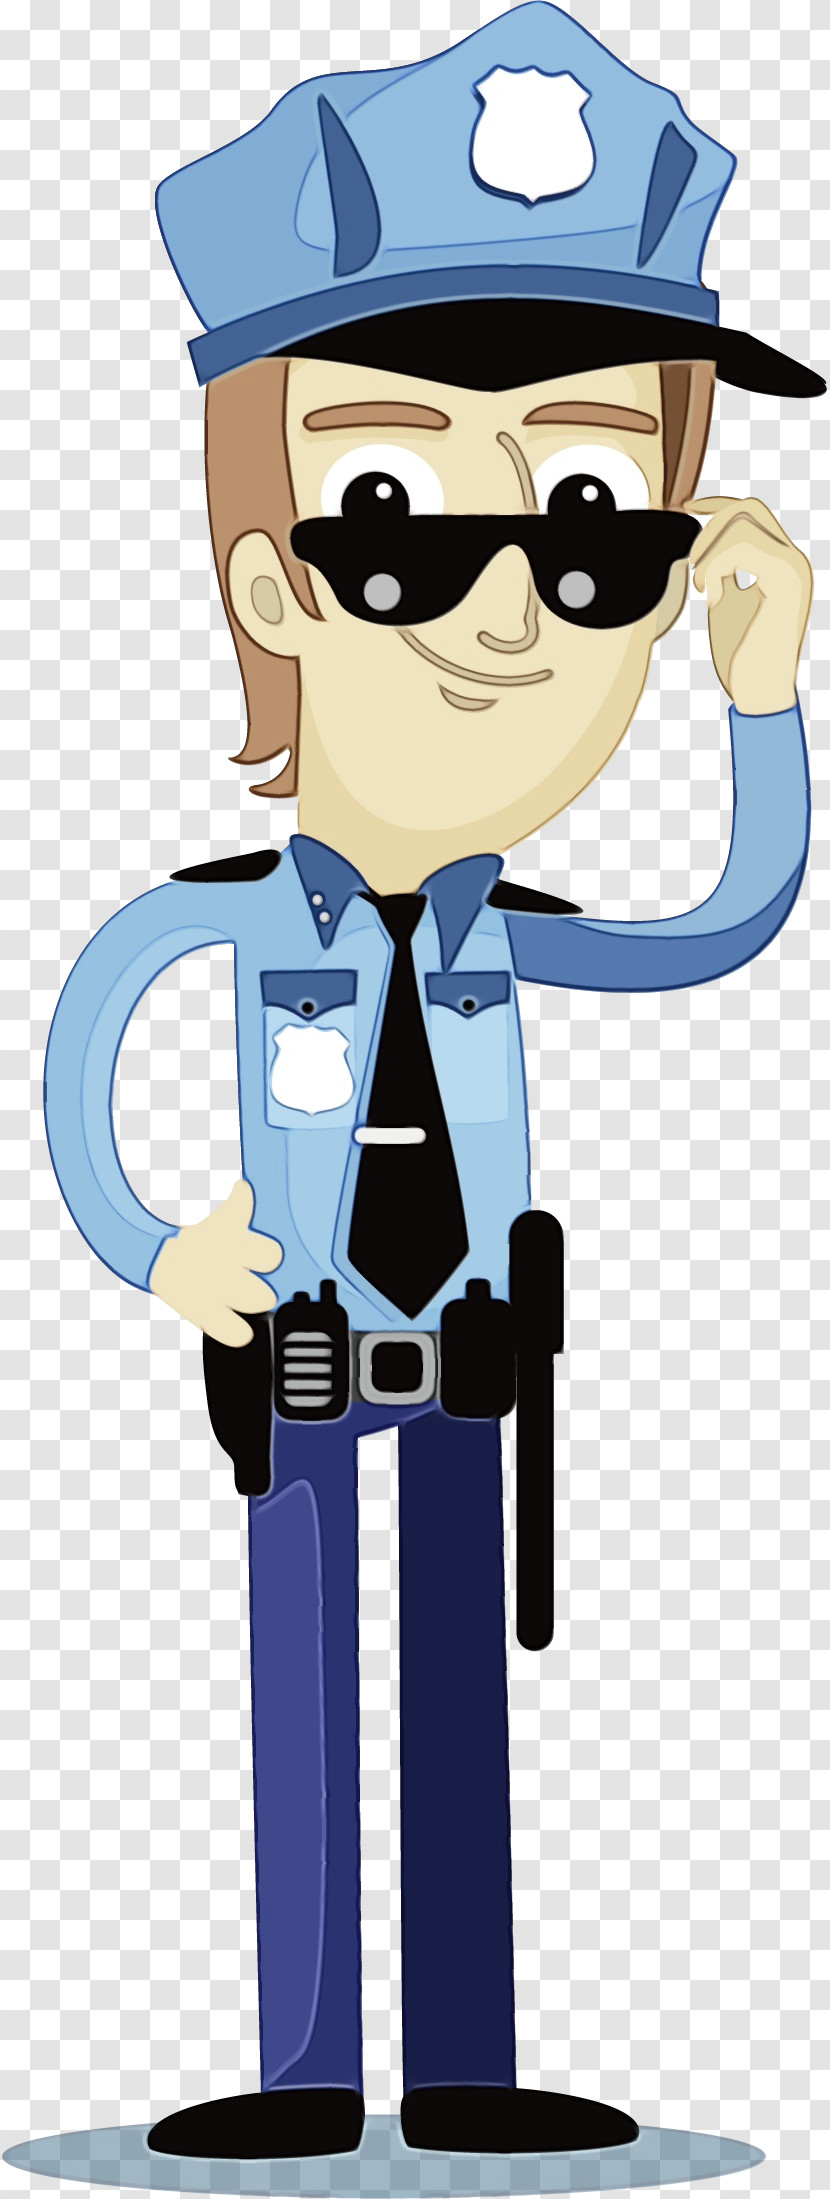 Cartoon Official Police Police Officer Gesture Transparent PNG